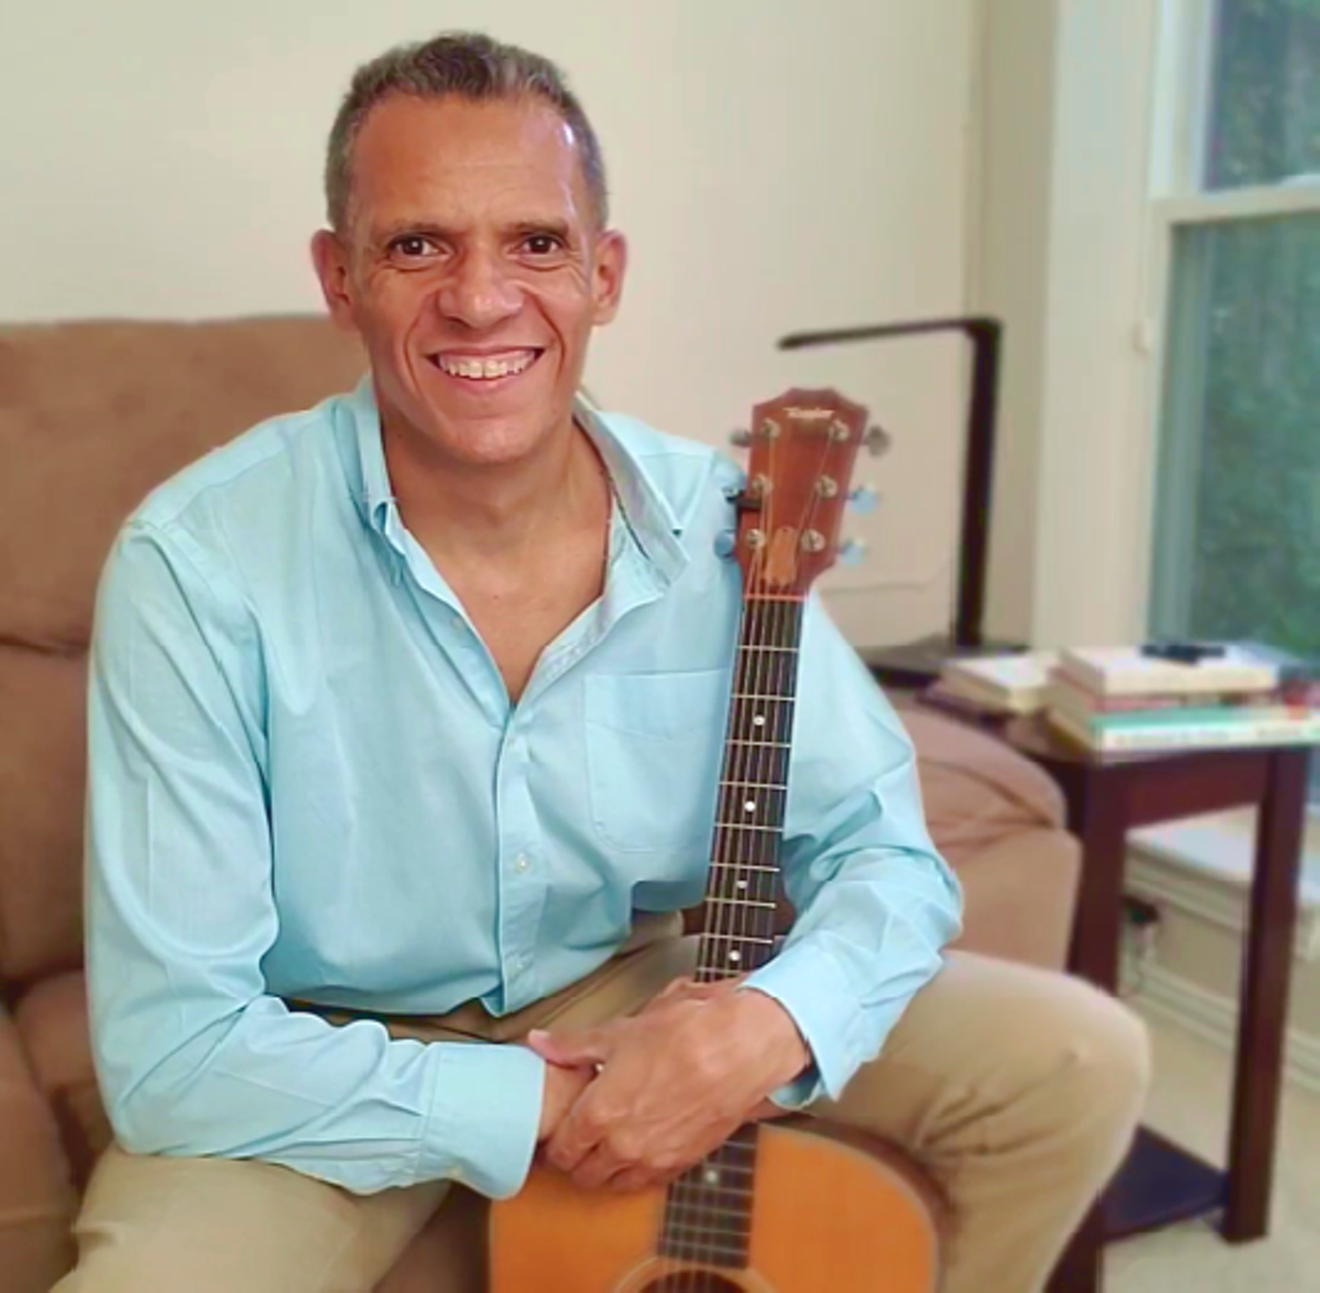 When he’s not campaigning for city council, JJ Fenceroy can be found strumming a guitar.